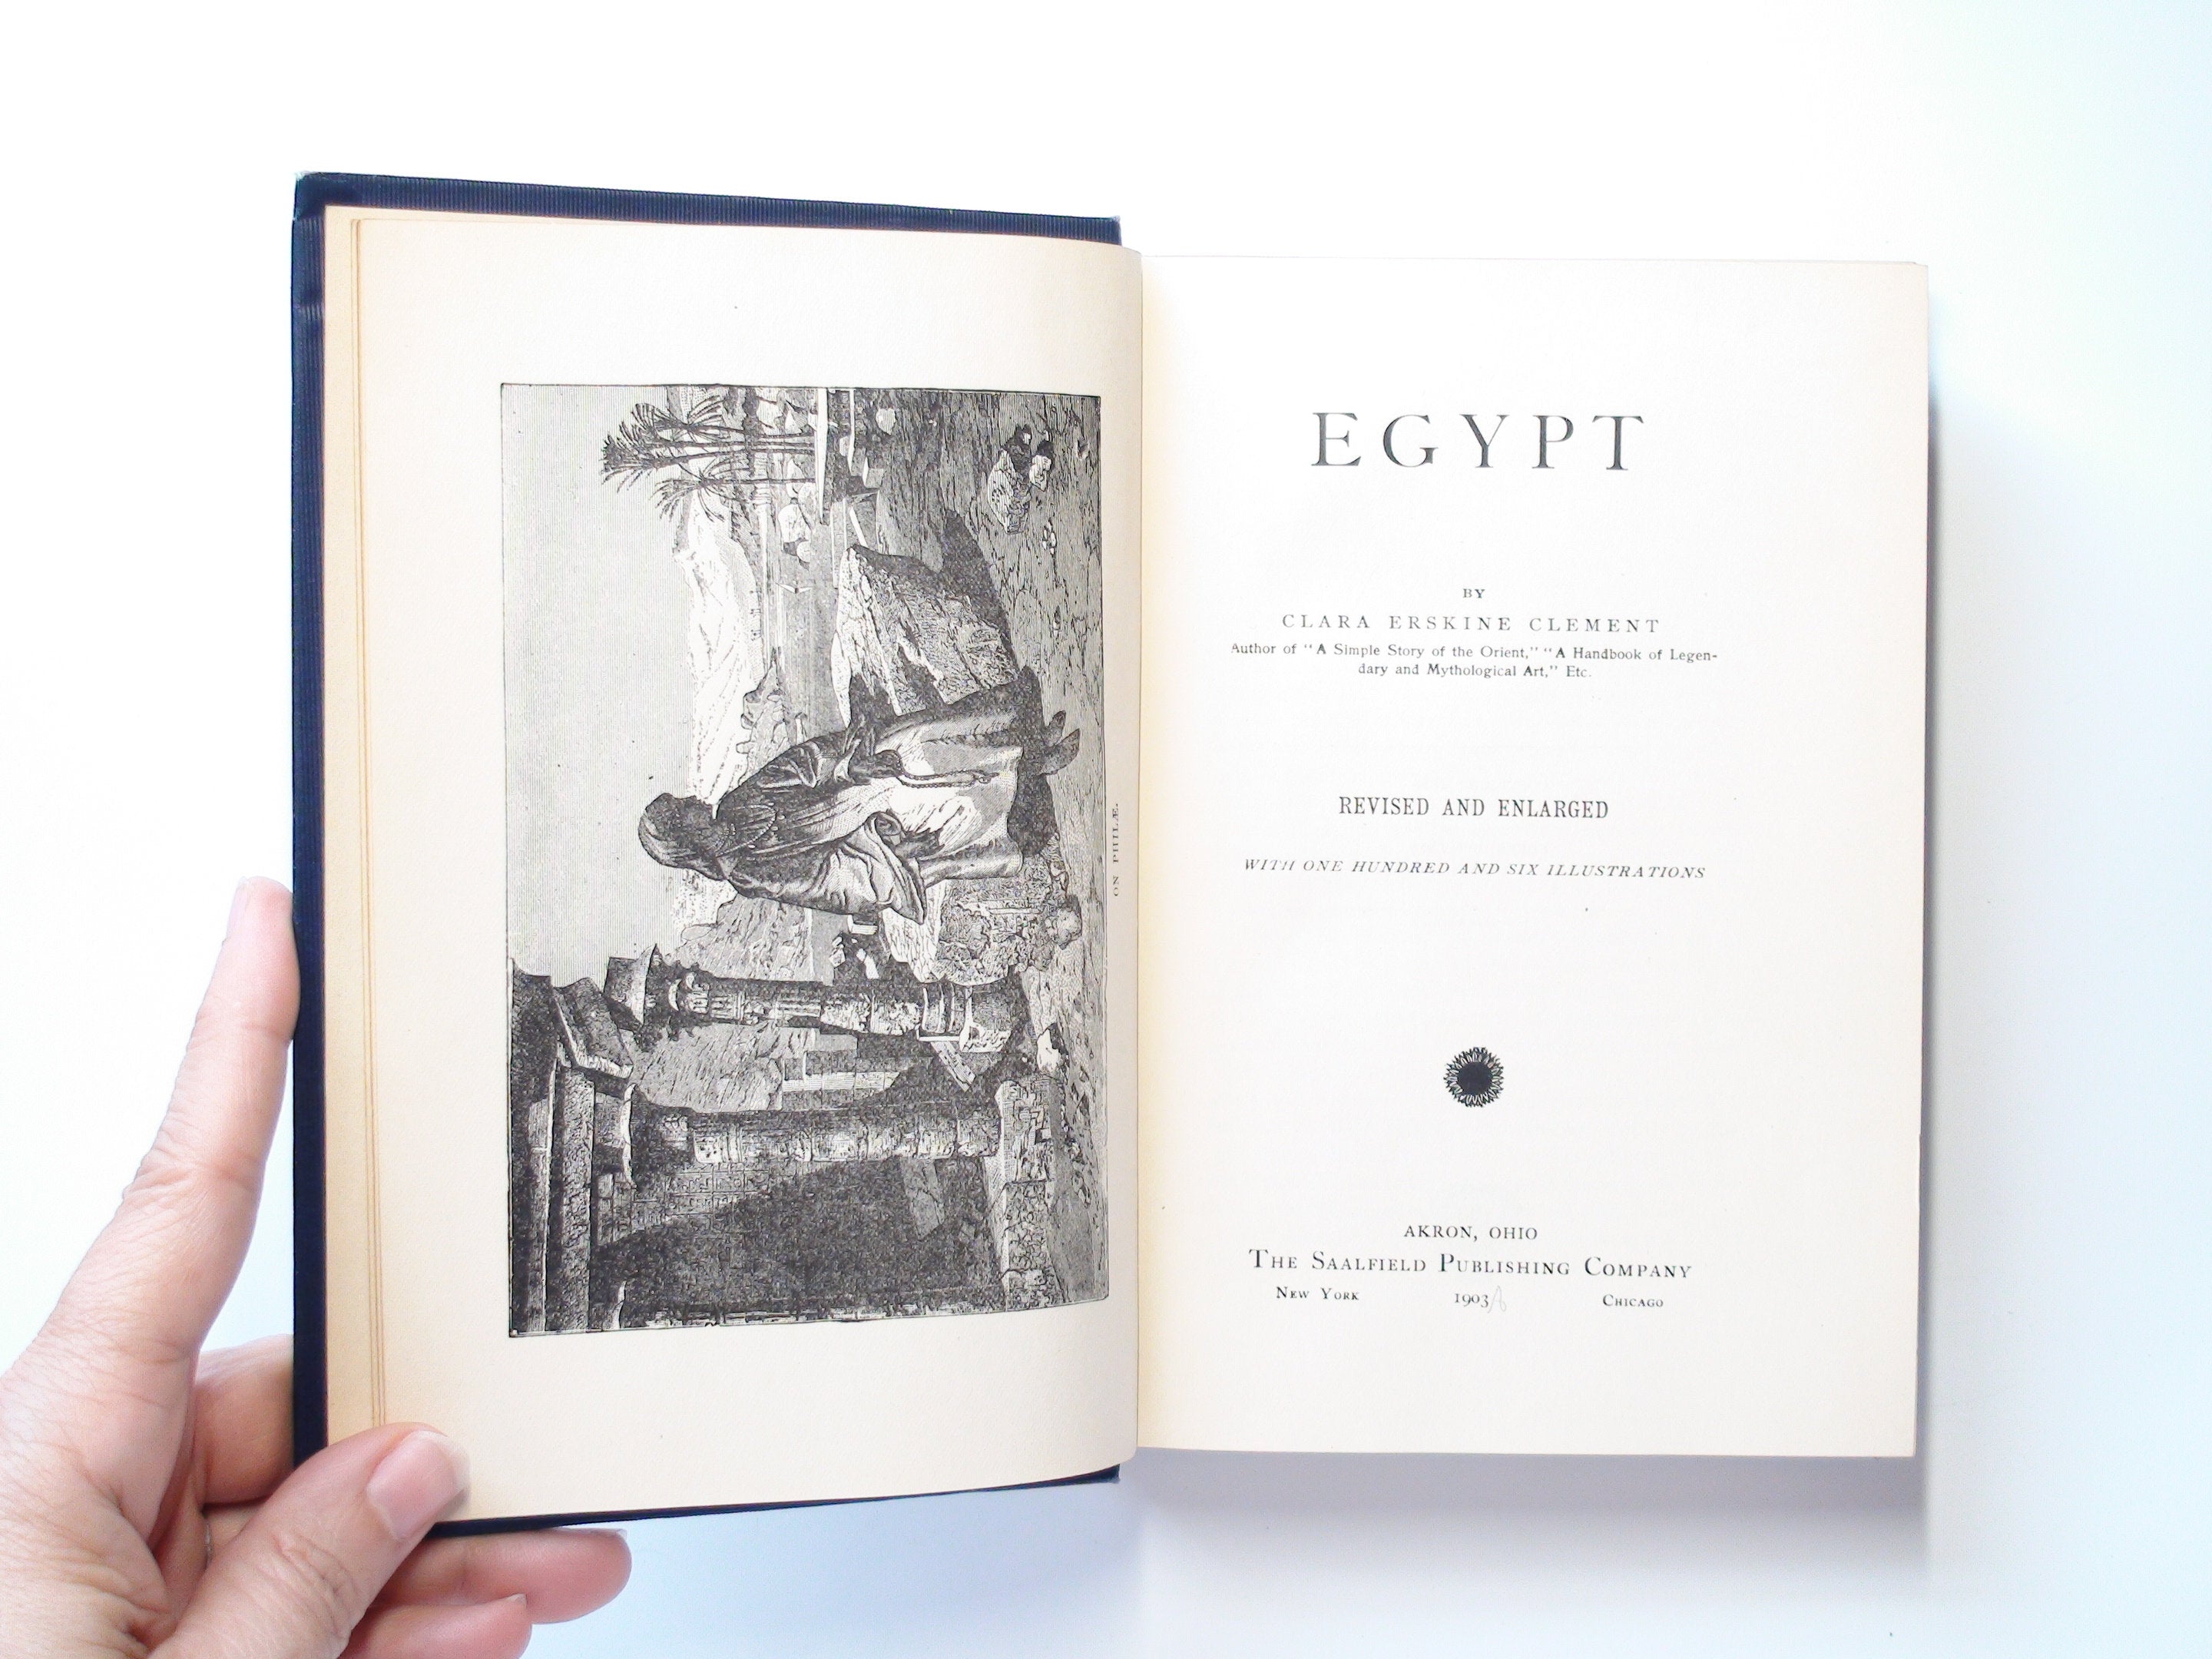 Egypt, by Clara Erskine Clement, Revised and Enlarged, Illustrated, 1903